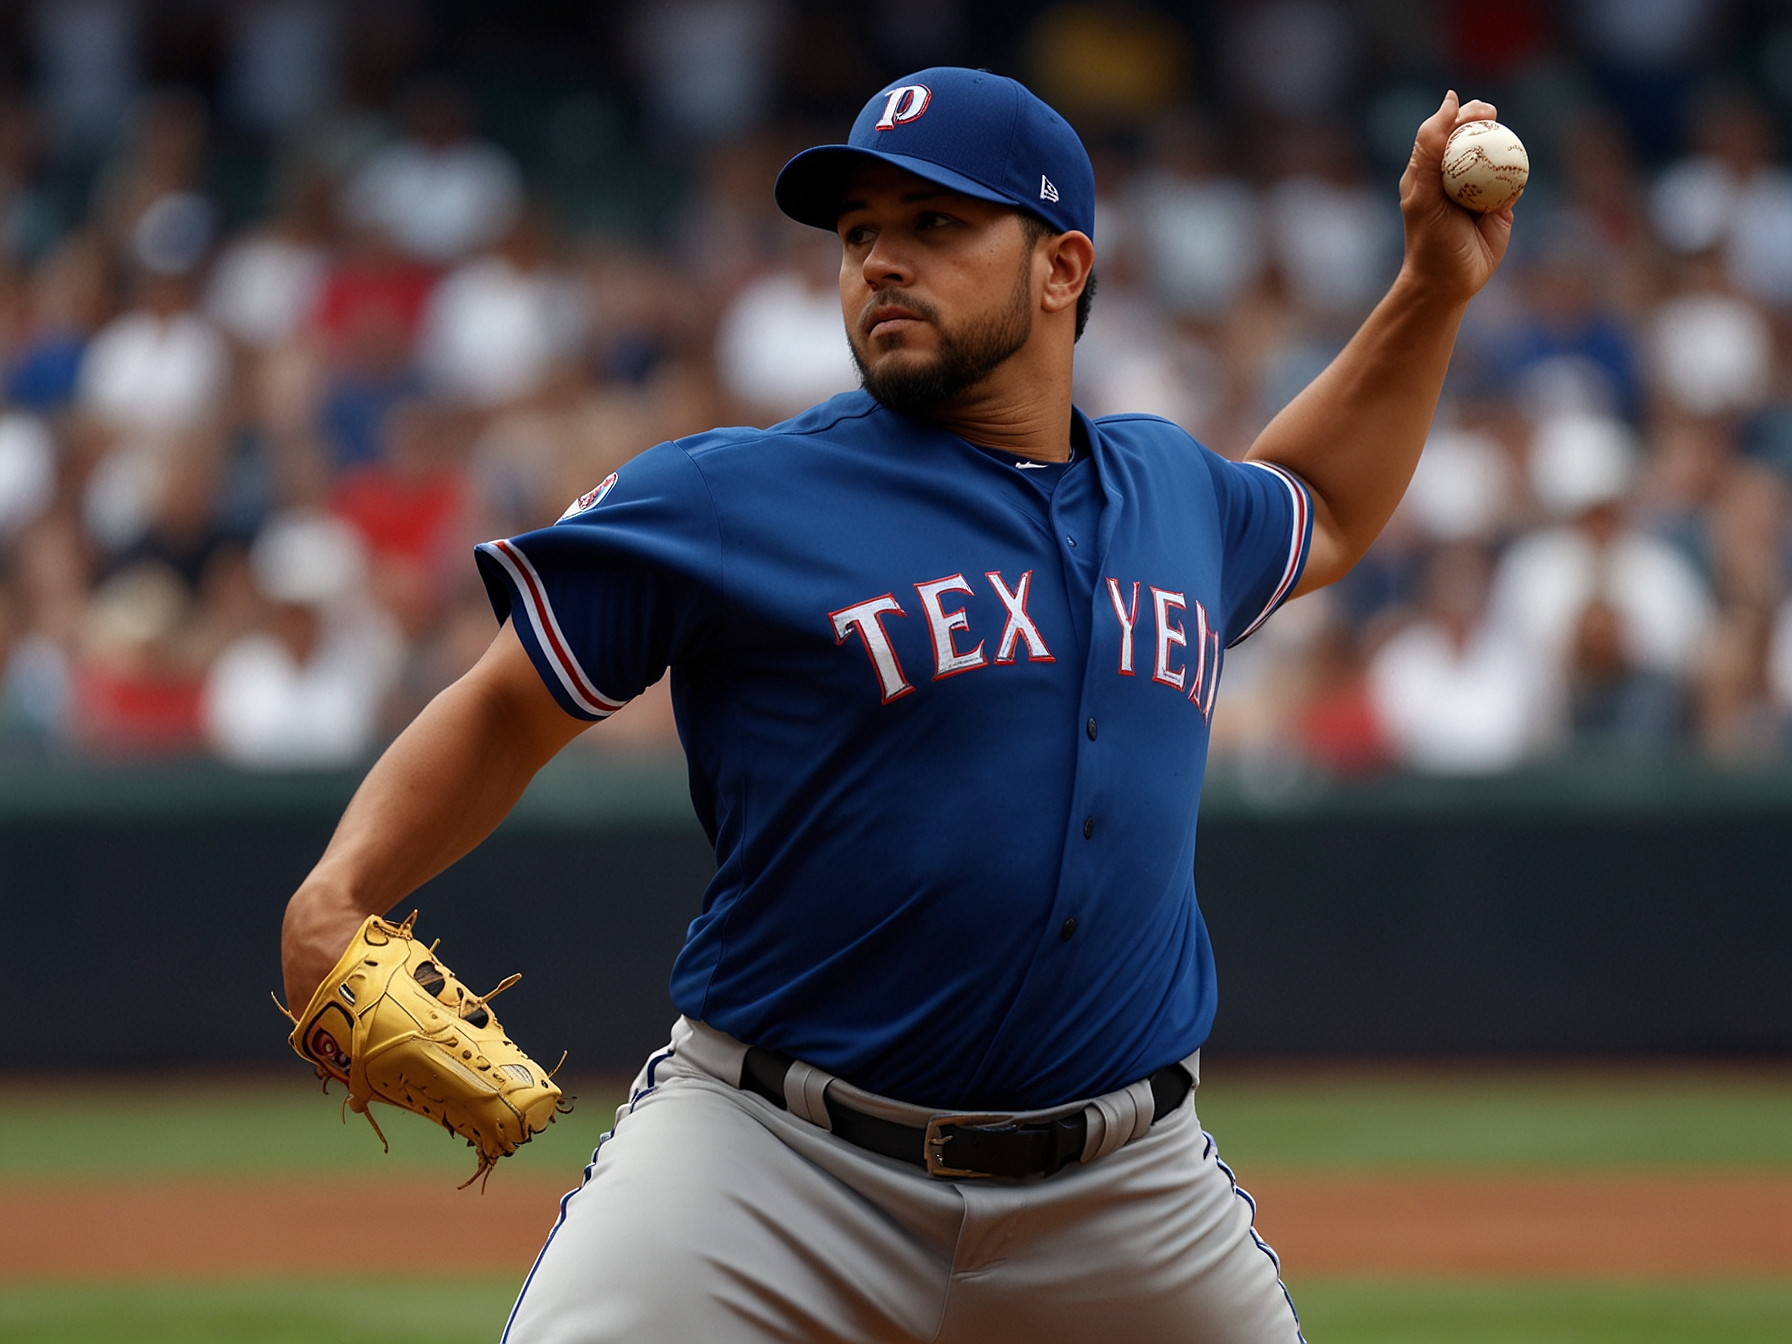 Image of Rangers' pitcher Martín Pérez delivering a pitch during the nail-biting game on June 26, matching Brewers' Corbin Burnes inning for inning in a closely contested final game.